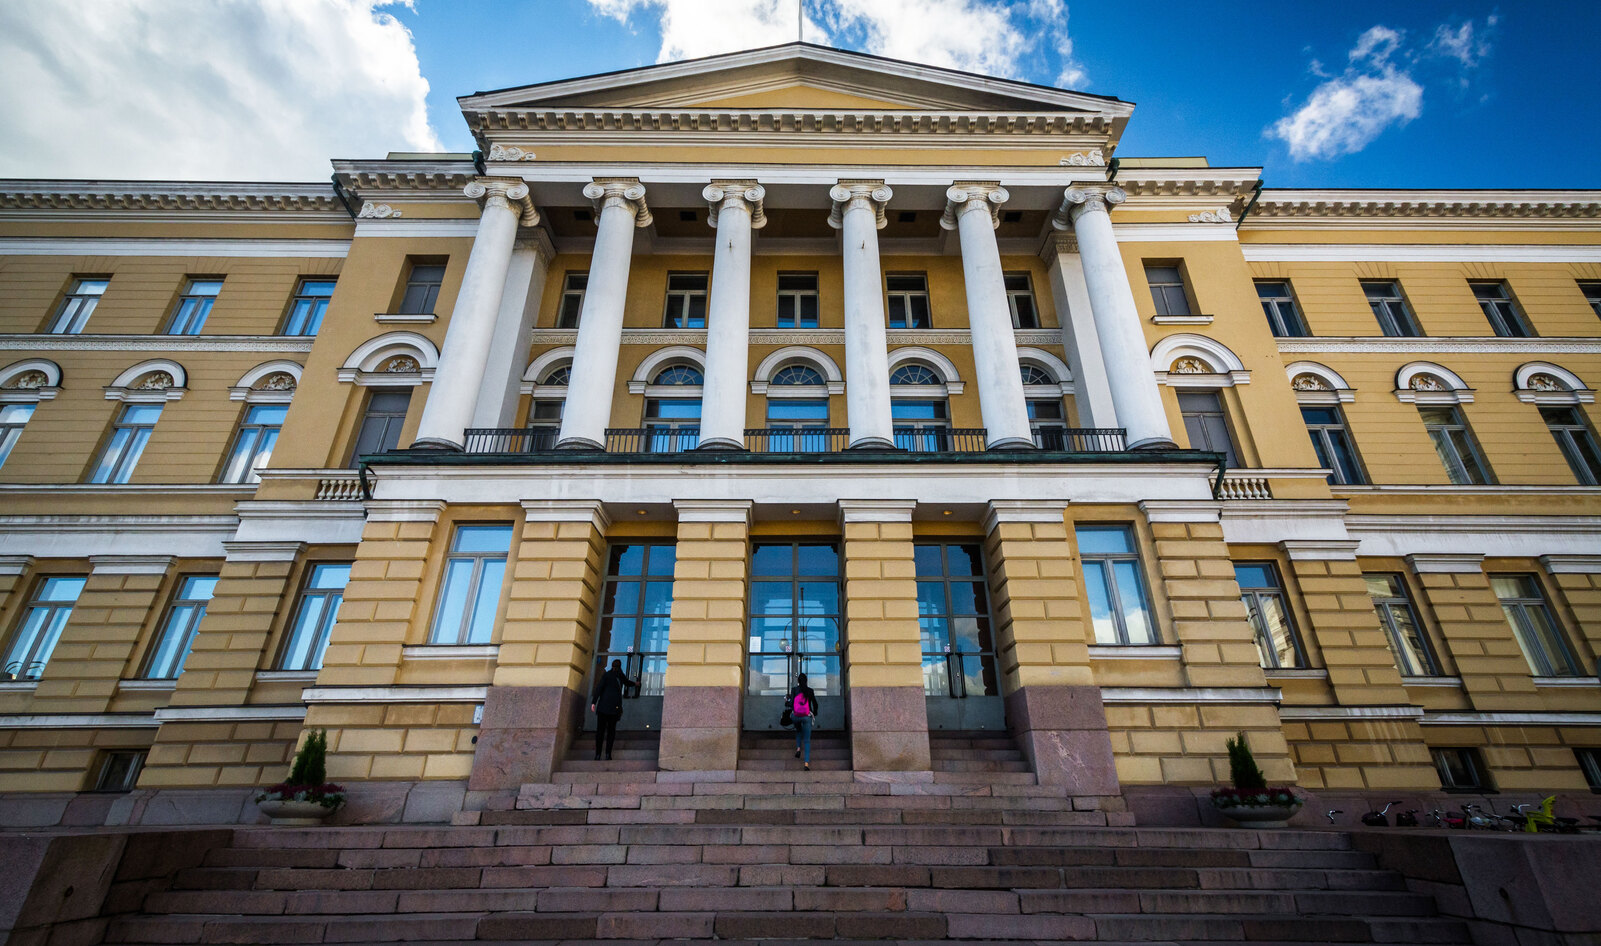 Finland’s Oldest and Largest University Ditches Beef